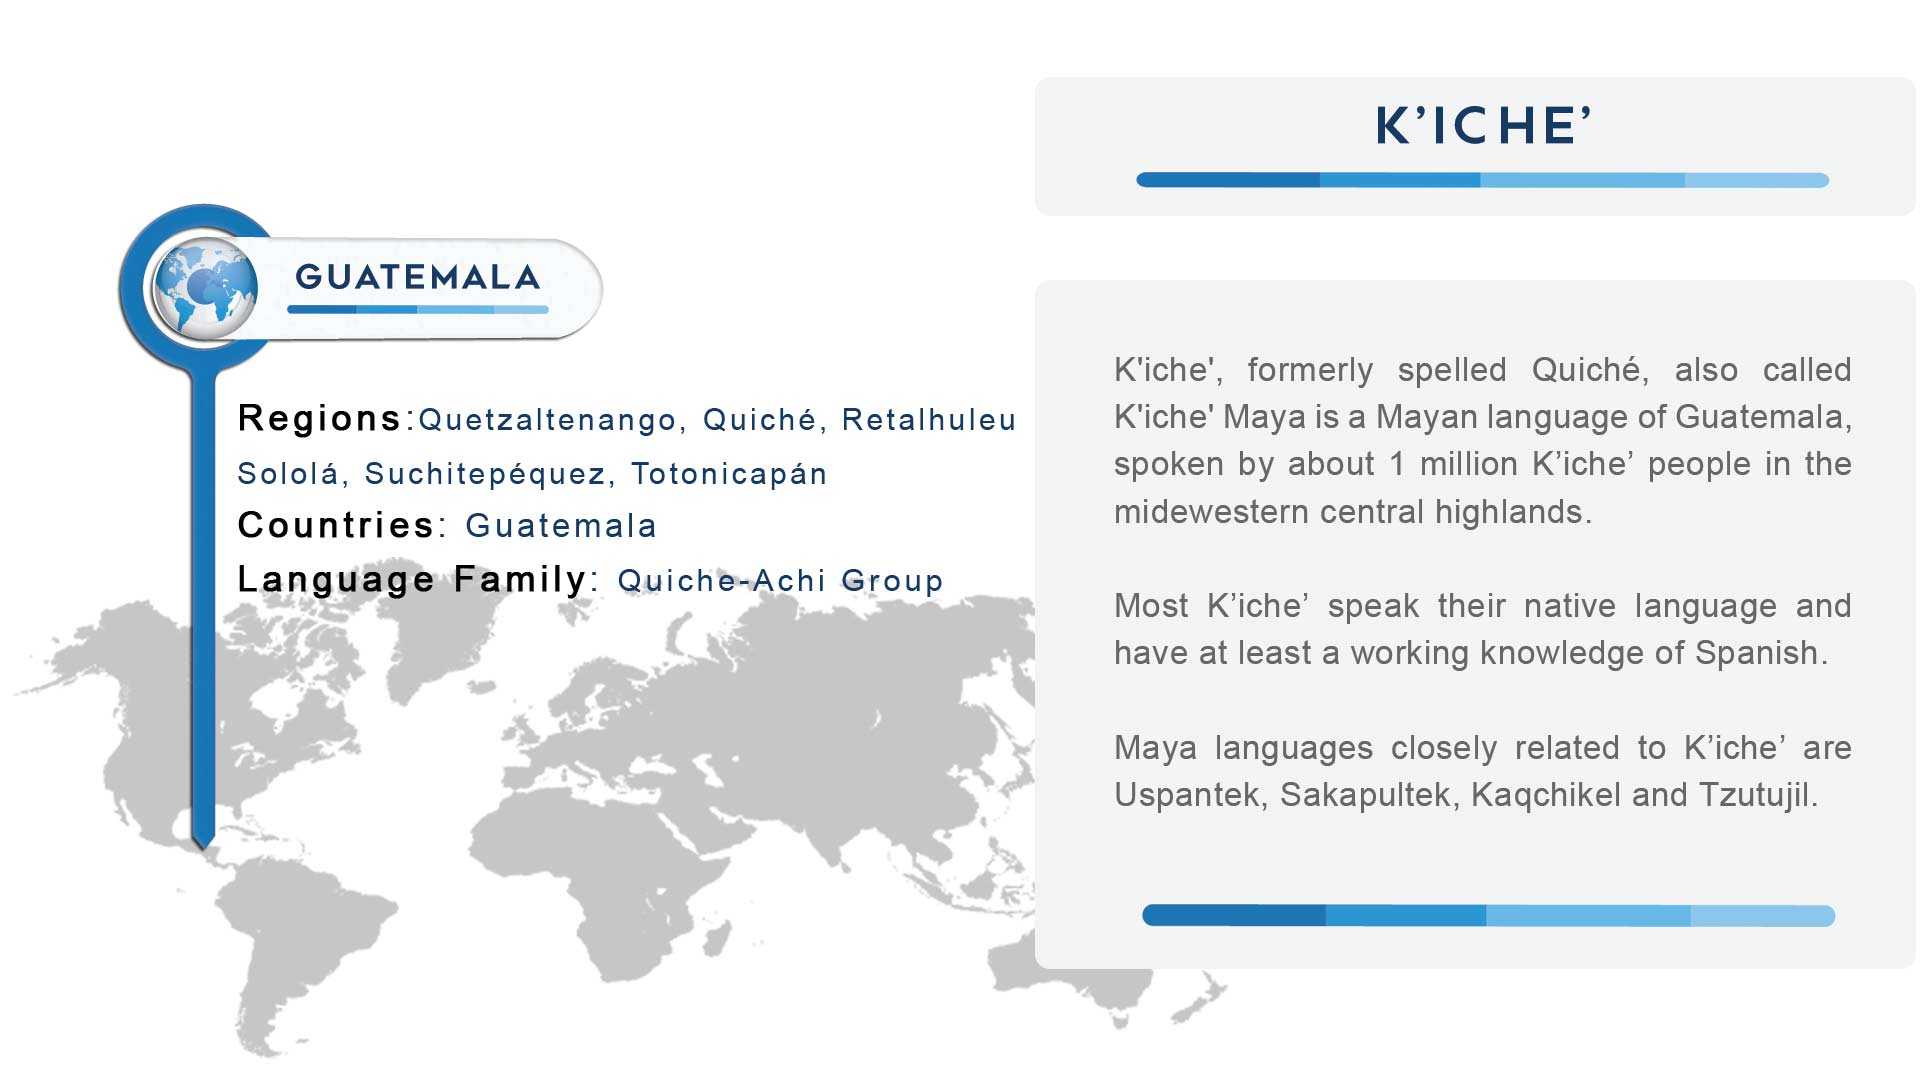 K’iche’ is quite different from the grammar of standard average Indo-European languages such as English and Spanish but is not especially complex.